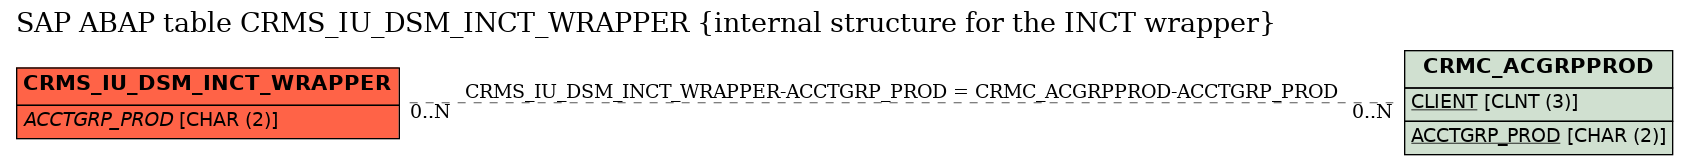 E-R Diagram for table CRMS_IU_DSM_INCT_WRAPPER (internal structure for the INCT wrapper)